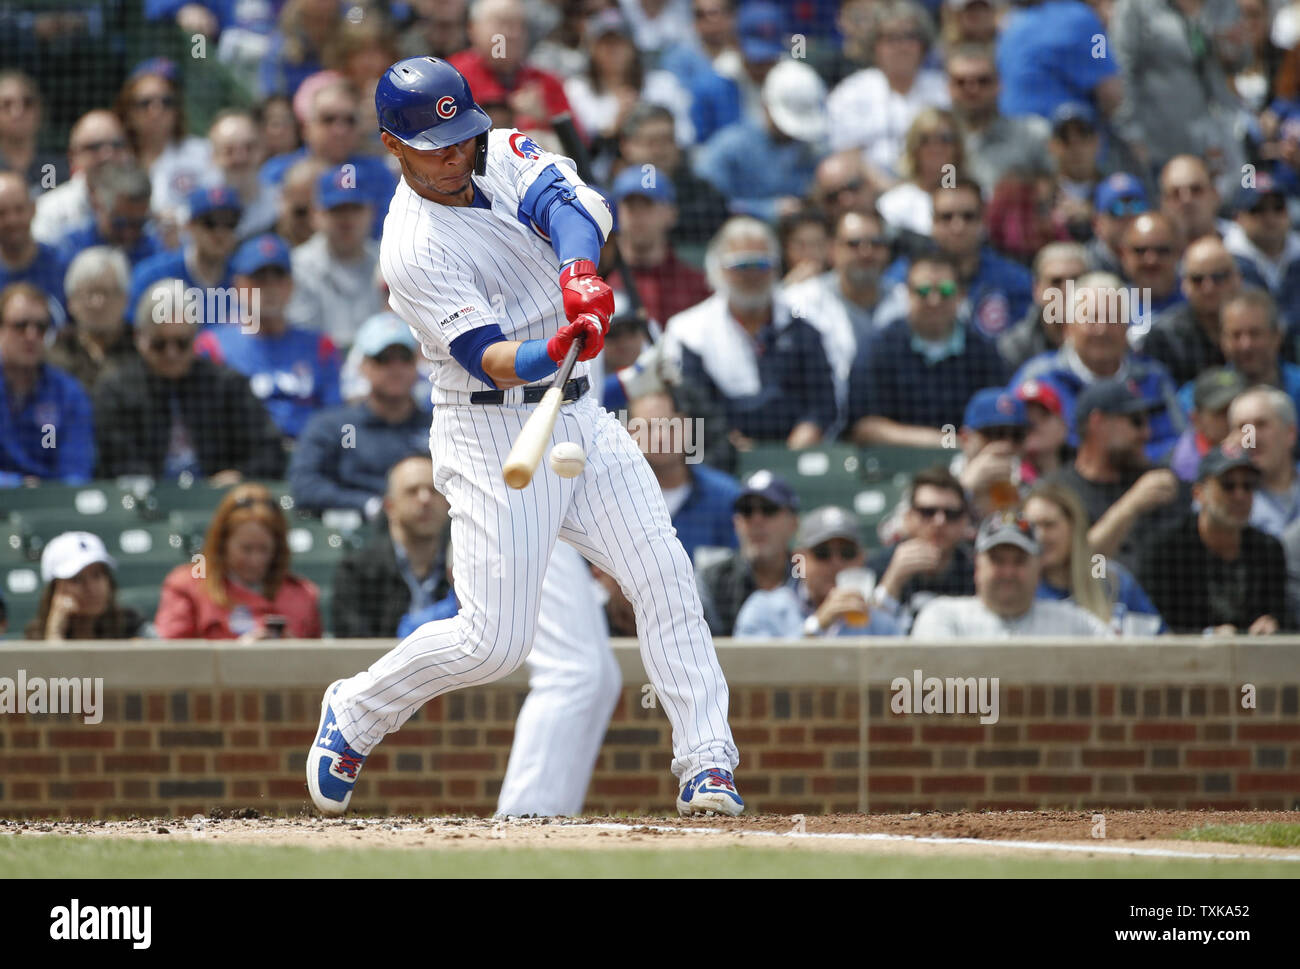 Chicago Cubs catcher Willson Contreras singles against the Los Angeles Dodgers in the second inning at Wrigley Field on April 25, 2019 in Chicago. Photo by Kamil Krzaczynski/UPI Stock Photo